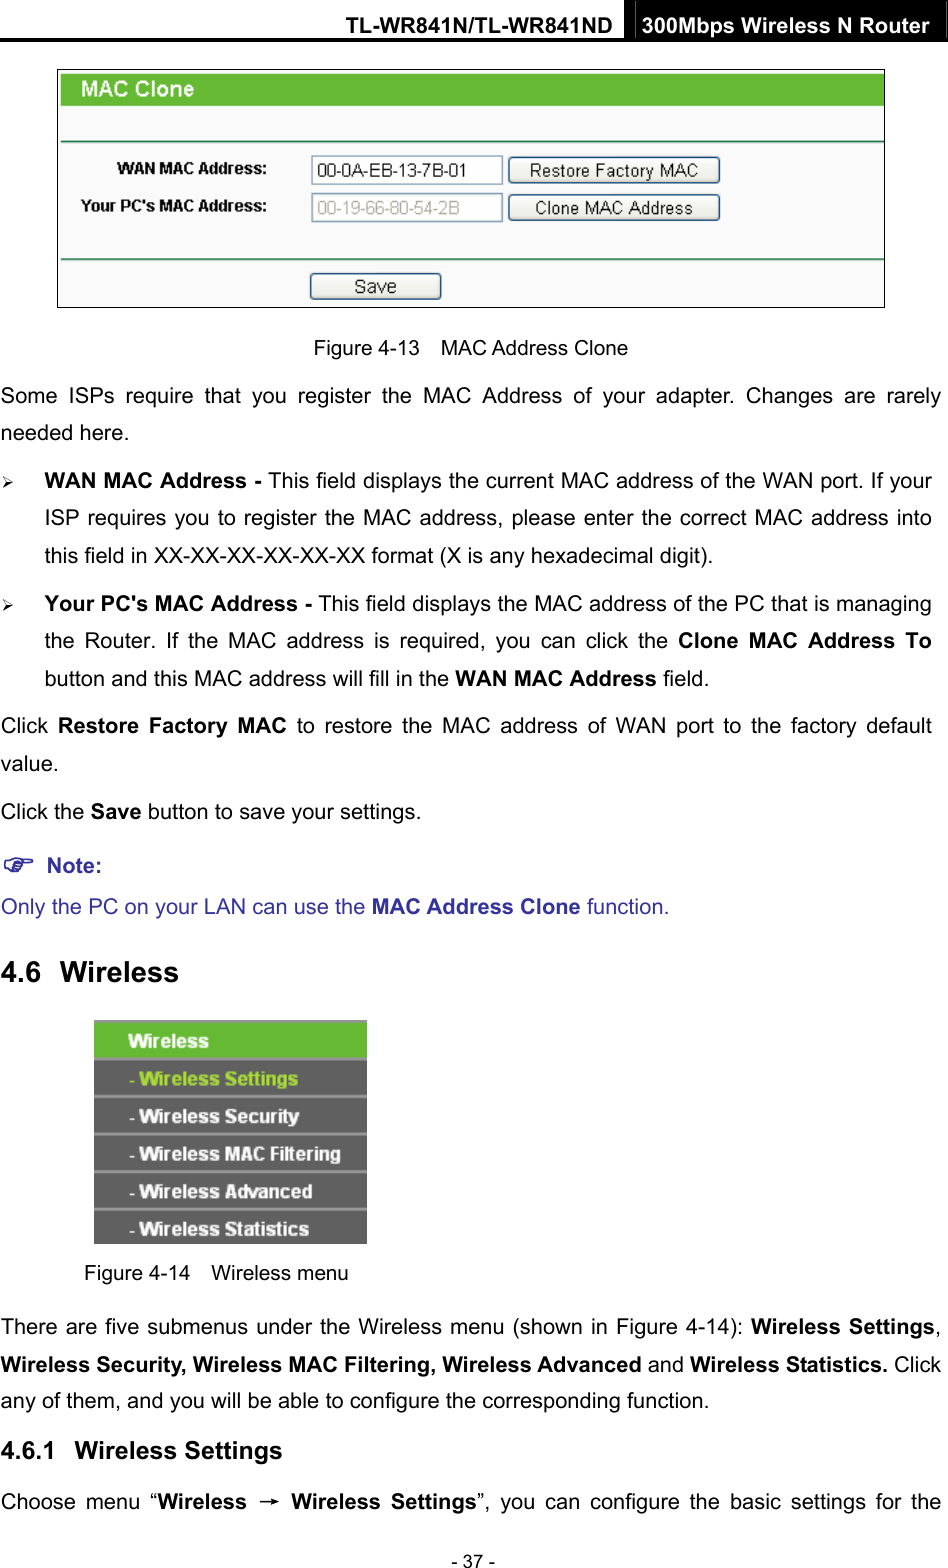 TL-WR841N/TL-WR841ND 300Mbps Wireless N Router - 37 -  Figure 4-13  MAC Address Clone Some ISPs require that you register the MAC Address of your adapter. Changes are rarely needed here. ¾ WAN MAC Address - This field displays the current MAC address of the WAN port. If your ISP requires you to register the MAC address, please enter the correct MAC address into this field in XX-XX-XX-XX-XX-XX format (X is any hexadecimal digit).   ¾ Your PC&apos;s MAC Address - This field displays the MAC address of the PC that is managing the Router. If the MAC address is required, you can click the Clone MAC Address To button and this MAC address will fill in the WAN MAC Address field. Click  Restore Factory MAC to restore the MAC address of WAN port to the factory default value. Click the Save button to save your settings. ) Note:  Only the PC on your LAN can use the MAC Address Clone function. 4.6  Wireless  Figure 4-14  Wireless menu There are five submenus under the Wireless menu (shown in Figure 4-14): Wireless Settings, Wireless Security, Wireless MAC Filtering, Wireless Advanced and Wireless Statistics. Click any of them, and you will be able to configure the corresponding function.   4.6.1  Wireless Settings Choose menu “Wireless  → Wireless Settings”, you can configure the basic settings for the 